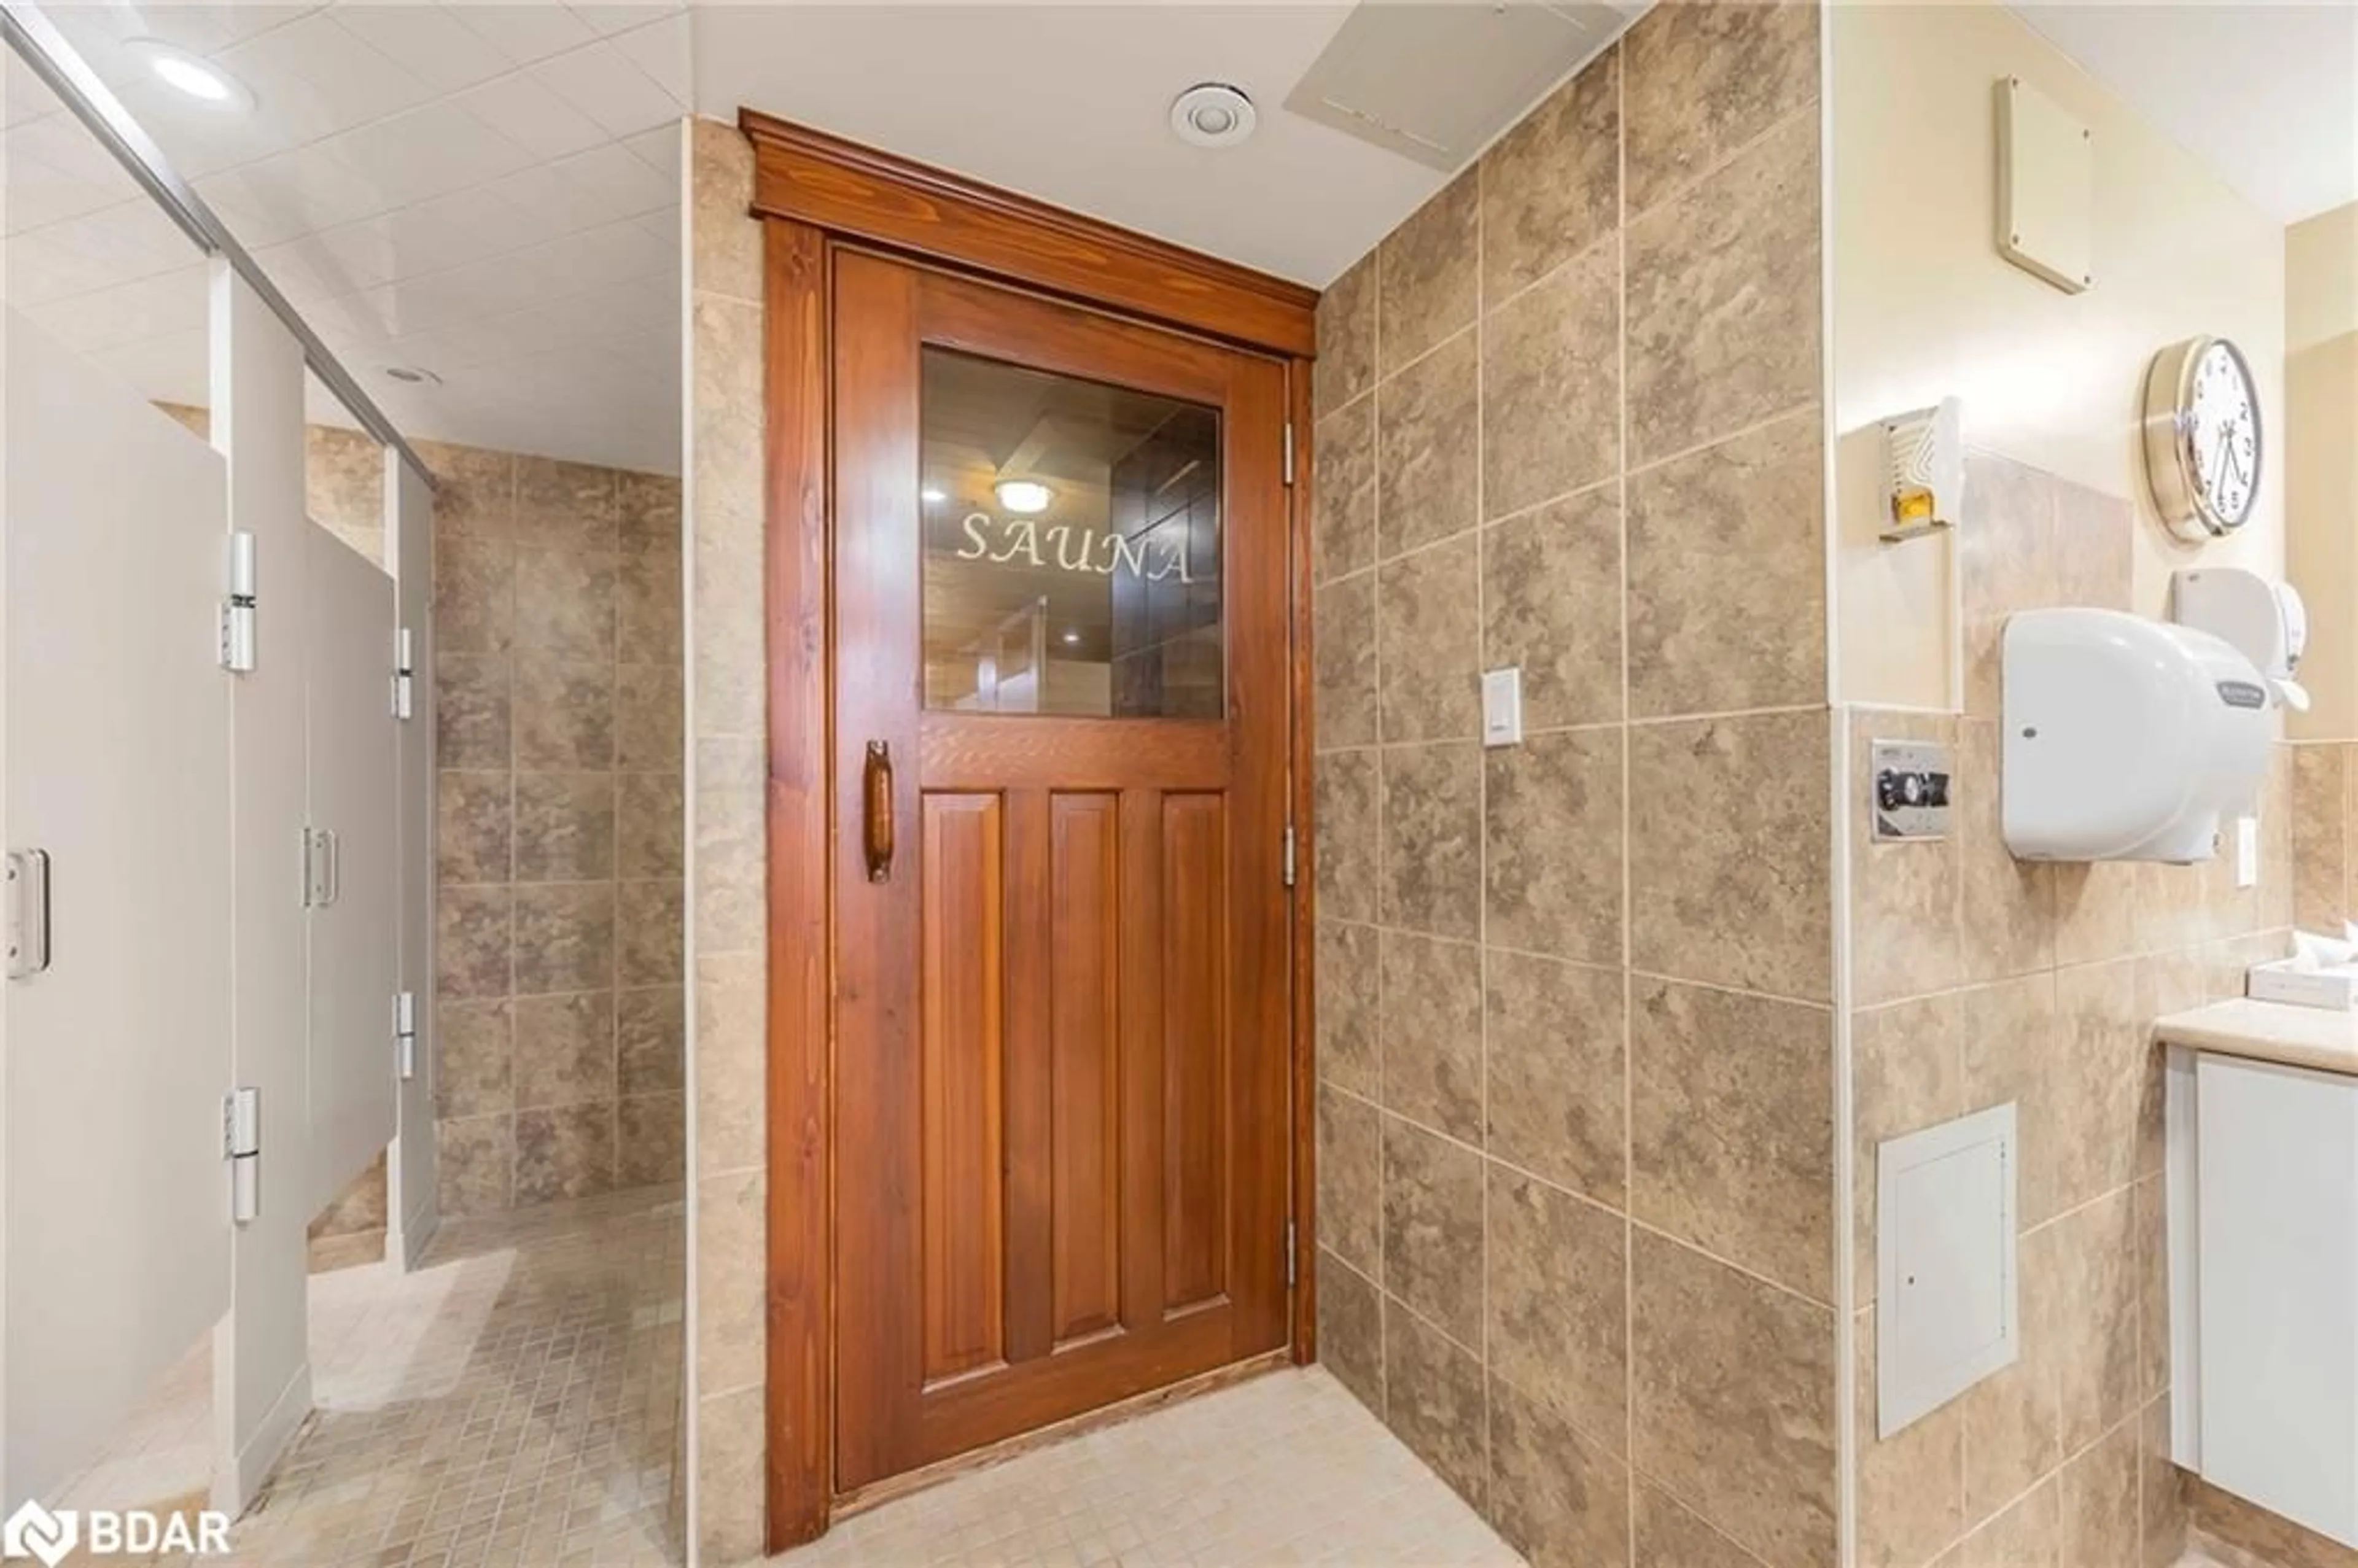 Bathroom for 181 Collier St #304, Barrie Ontario L4M 5L6